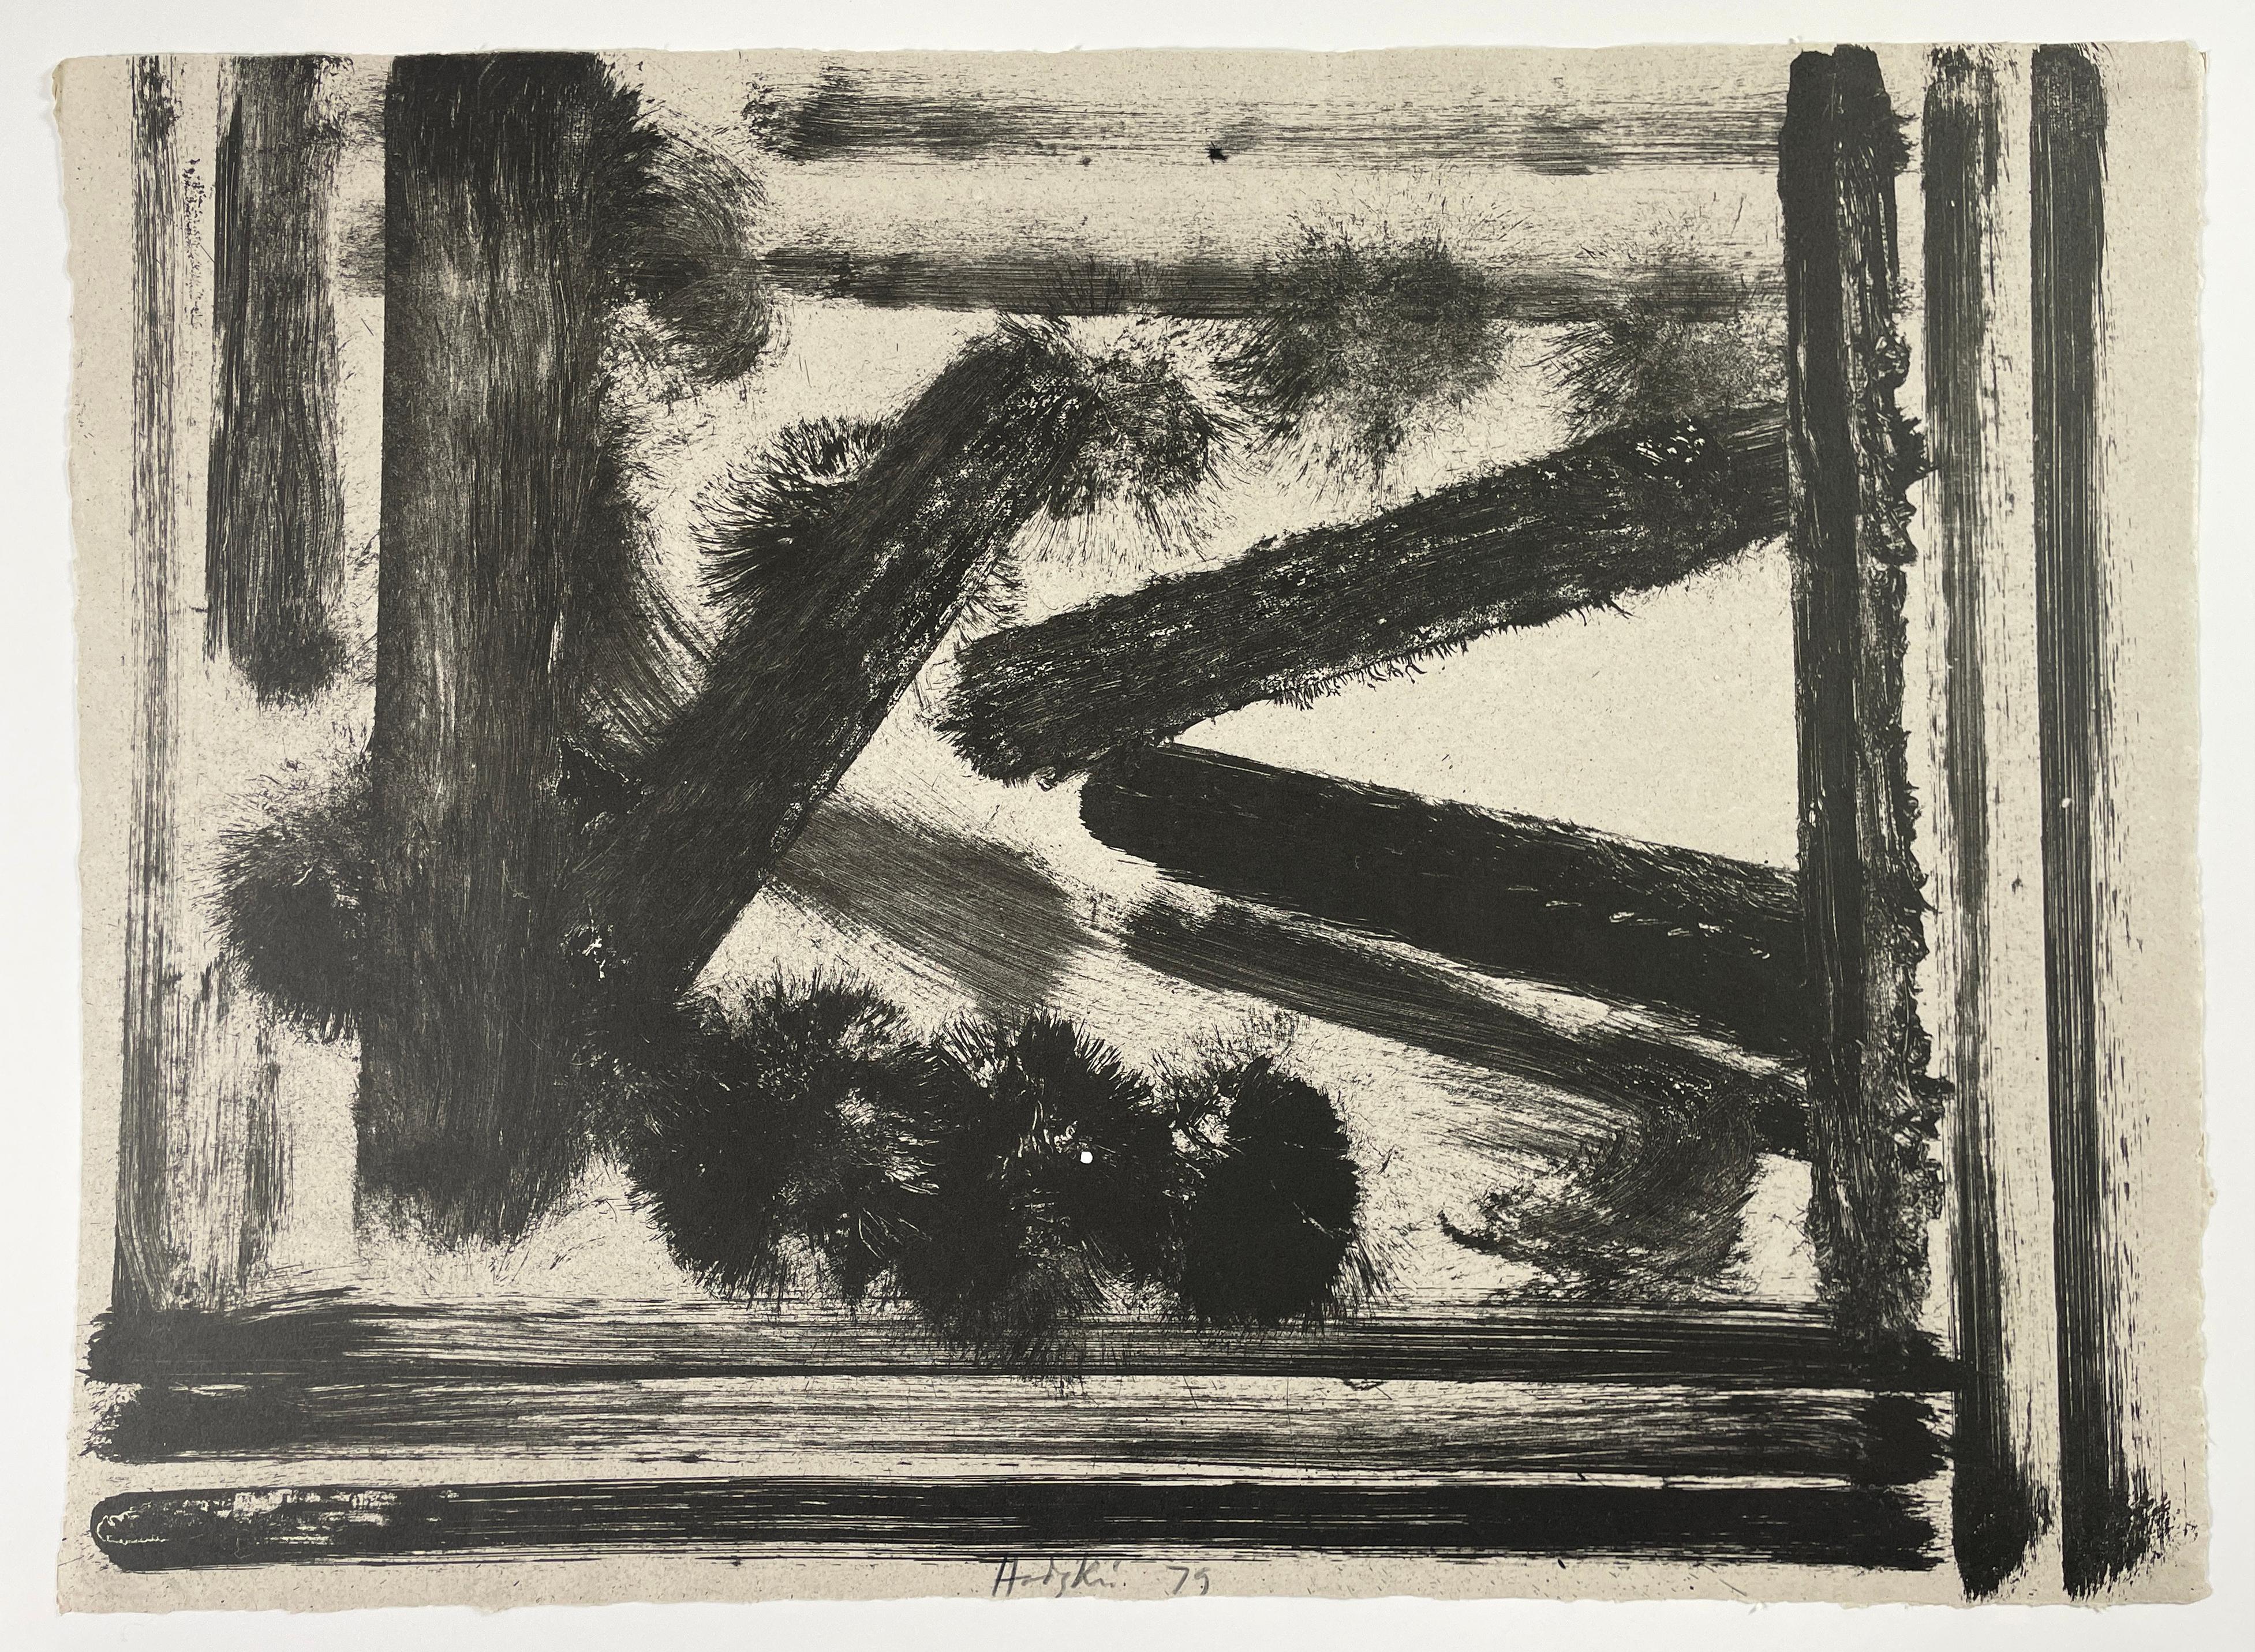 Here we are in Croydon by Howard Hodgkin highlights the artist's abstract black and white brushwork which became increasingly spontaneous and loose towards the end of the 1970s when this work was printed. The Tate's online entry reads: "This print